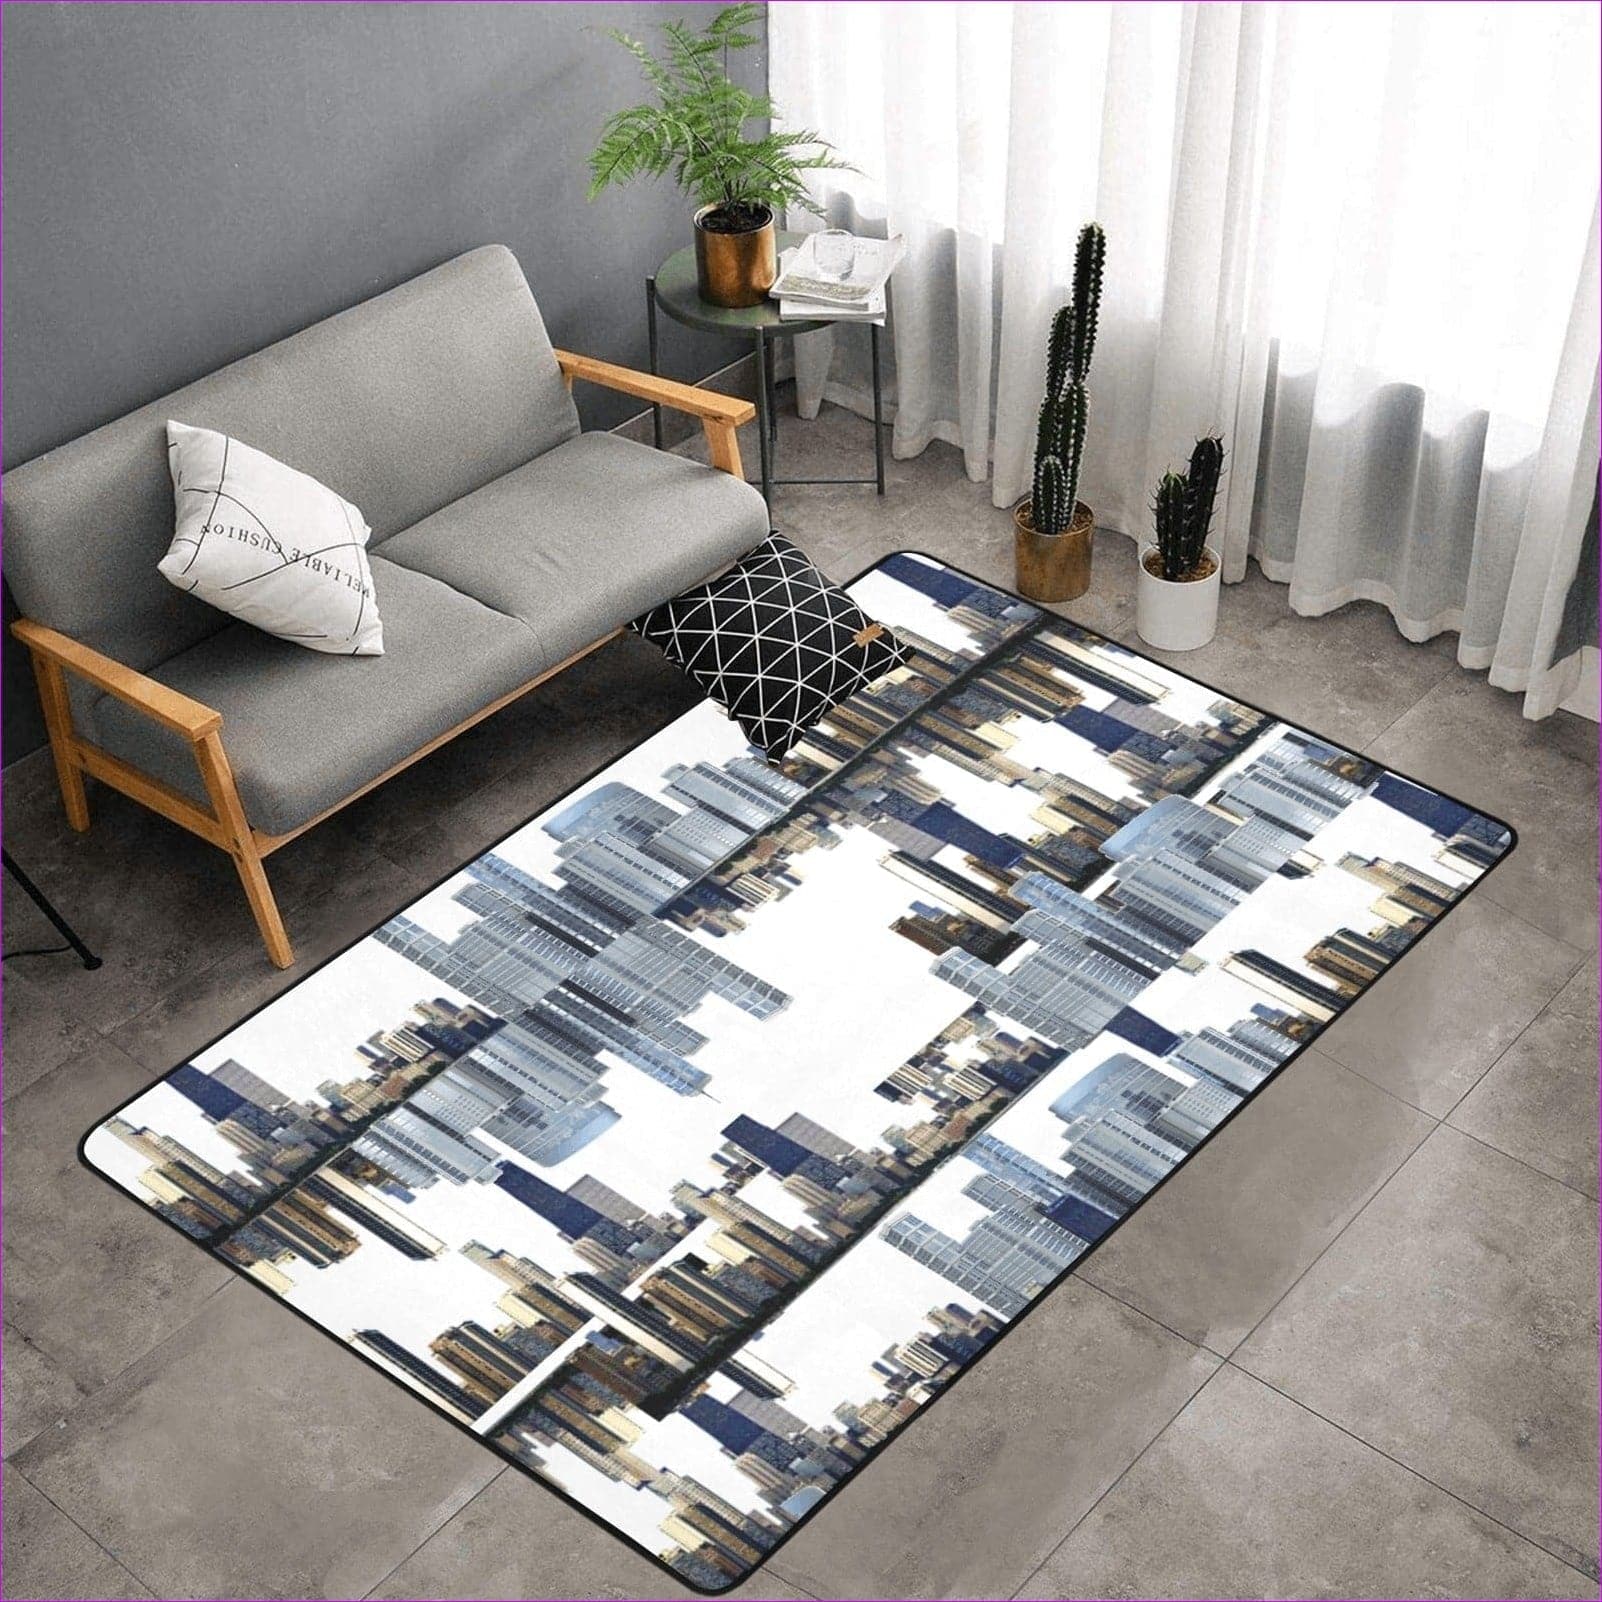 One Size city doubled-white Area Rug with Black Binding 7'x5' City Blocks Area Rug (4 colors) - area rug at TFC&H Co.